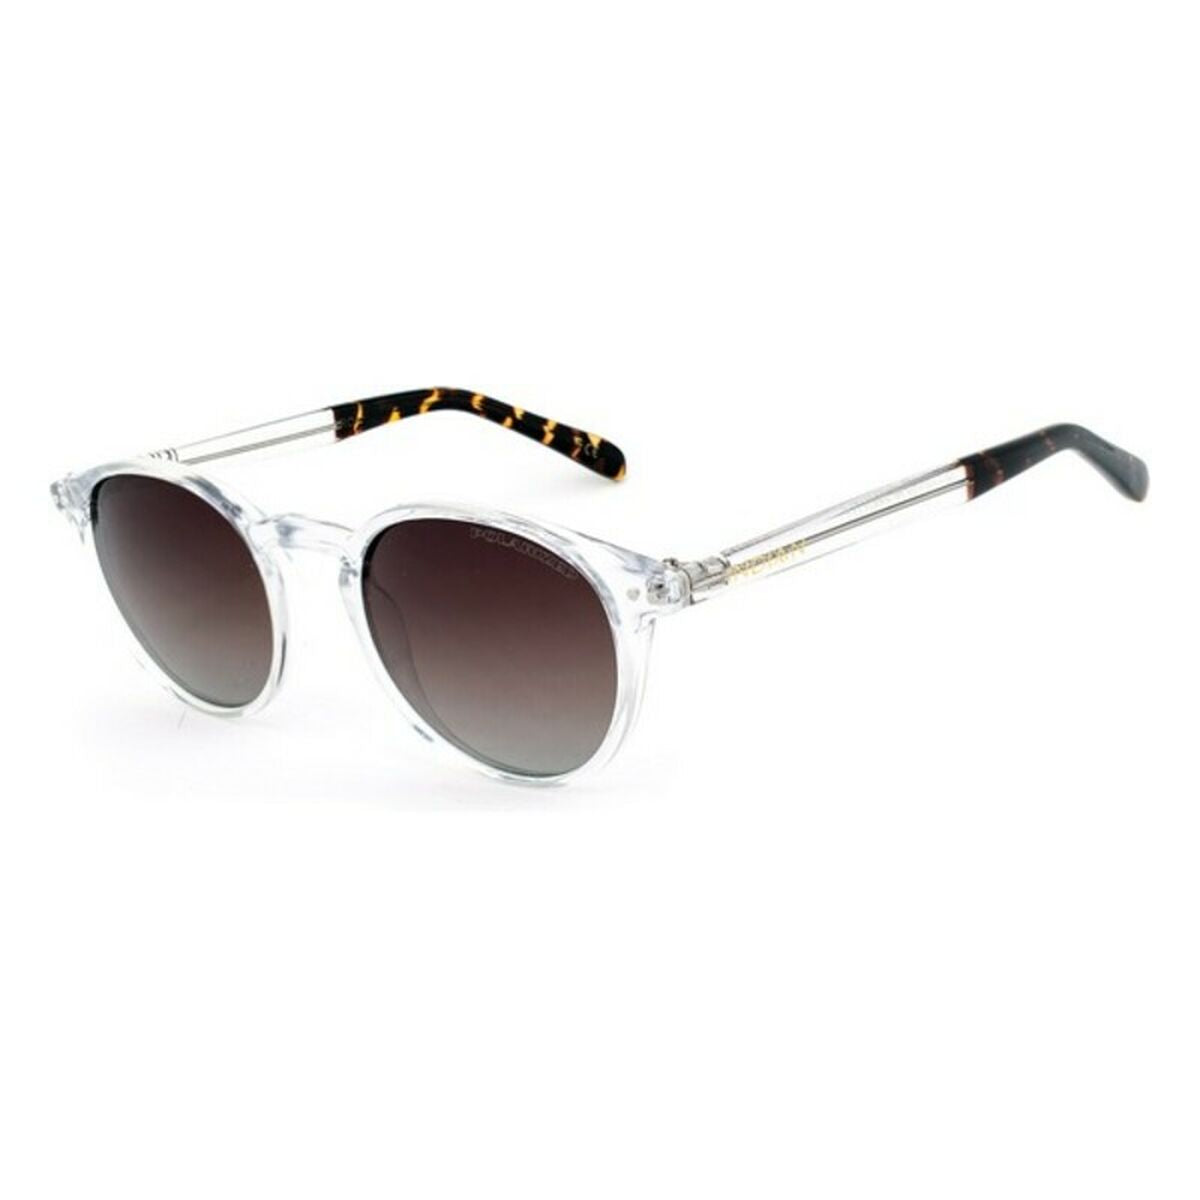 Unisex Sunglasses The Indian Face SIOUX-701-2 Ø 48 mm